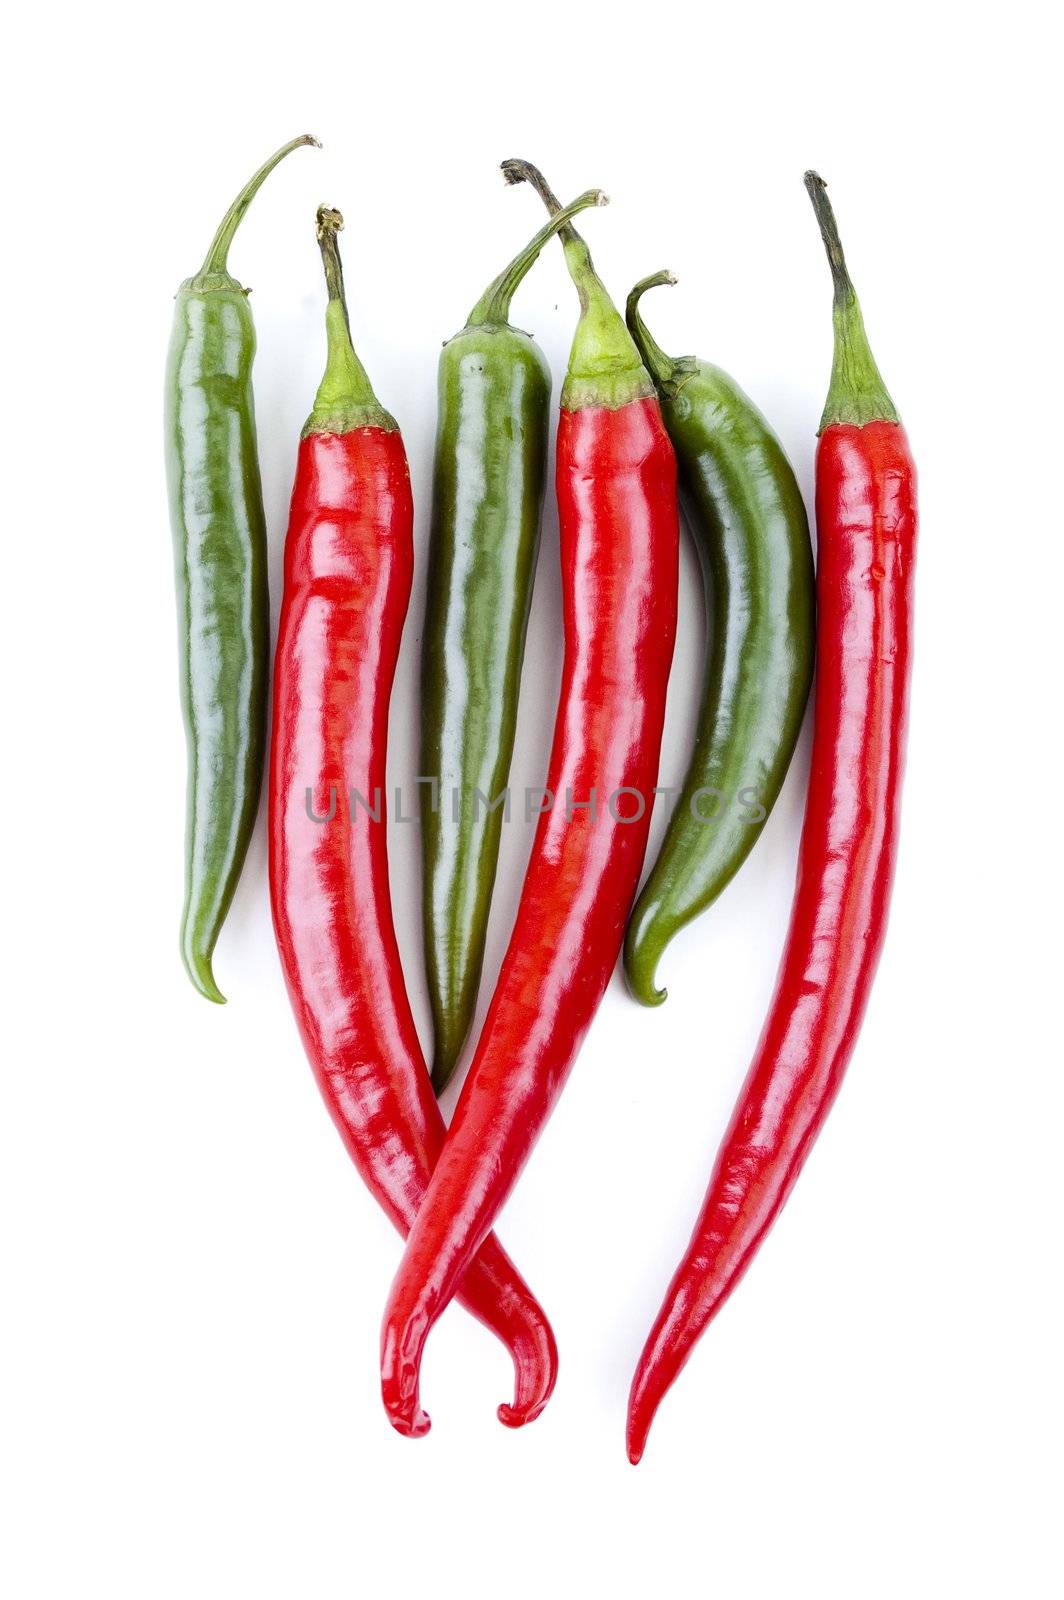 a vertical series of green and red chili peppers by Triphka